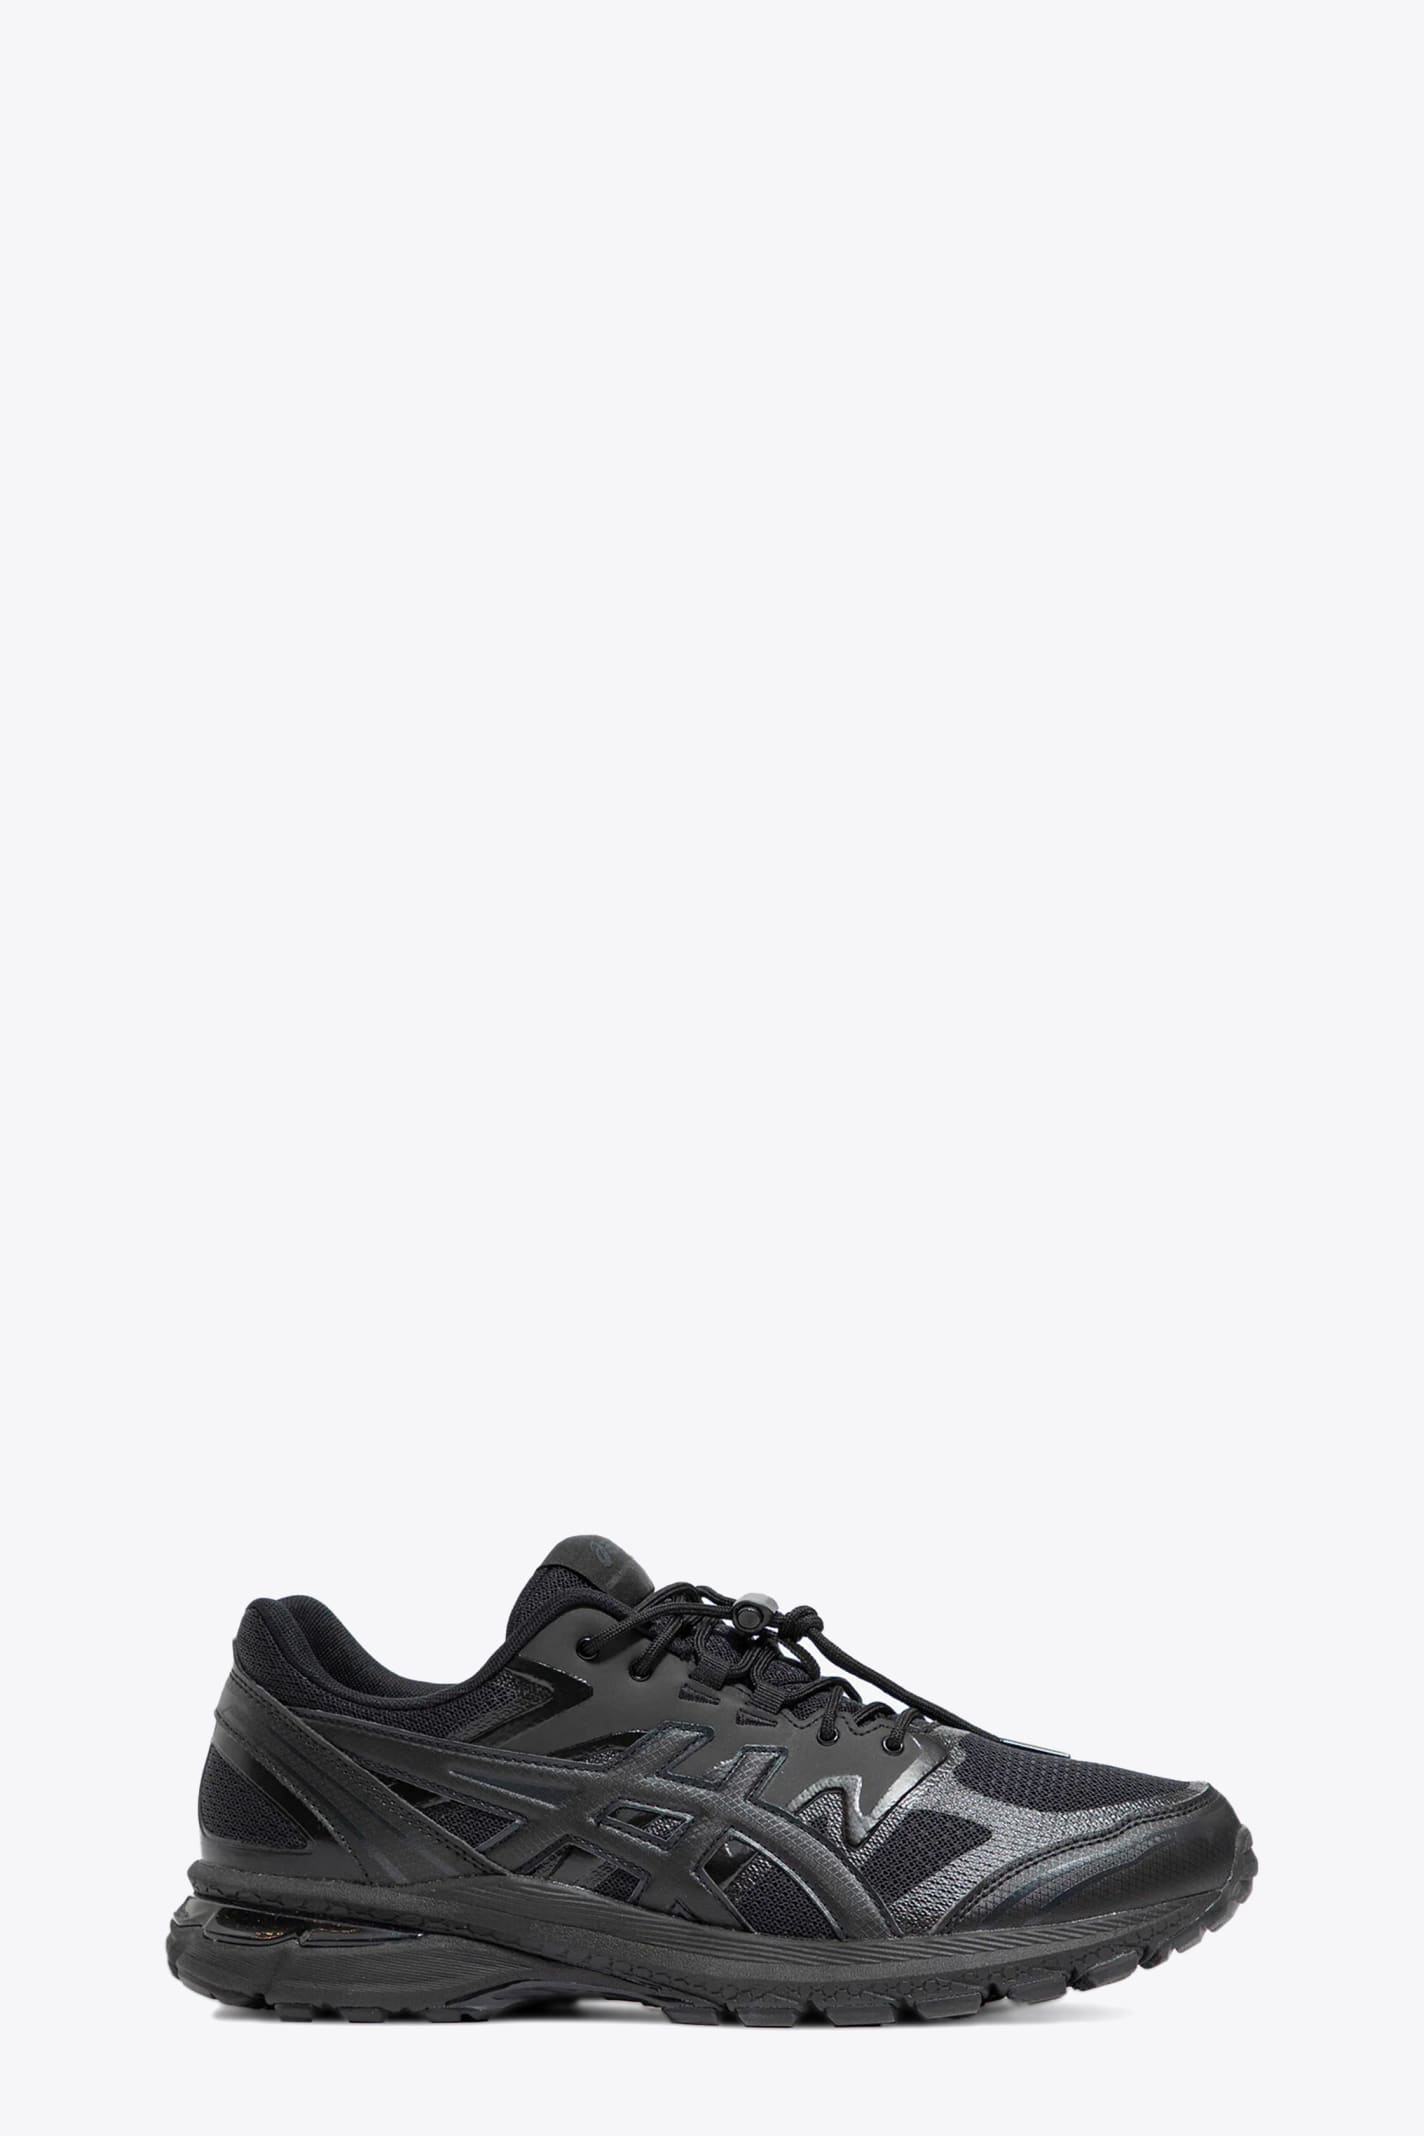 Shop Comme Des Garçons Shirt Mens Sneakers X Asics Asics Collaboration Black Mesh And Leather Running Sneaker In Nero